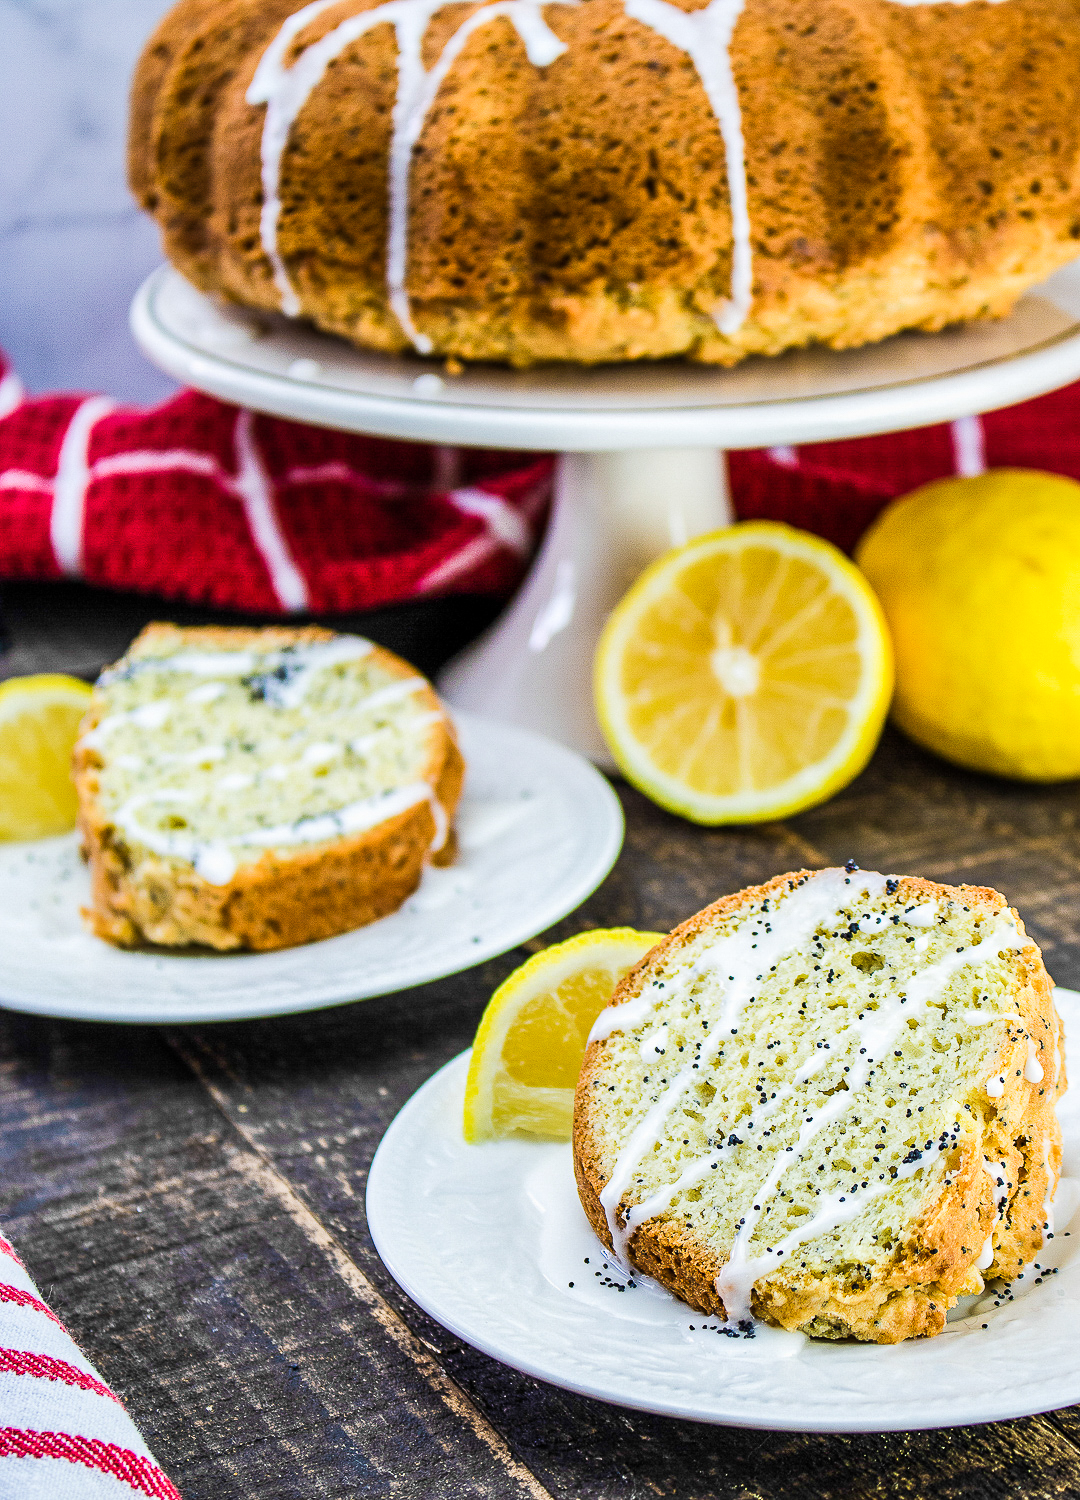 This easy lemon poppy seed bundt cake is the perfect dessert to make for a crowd. It’s sweet and tangy and sure to be a hit!